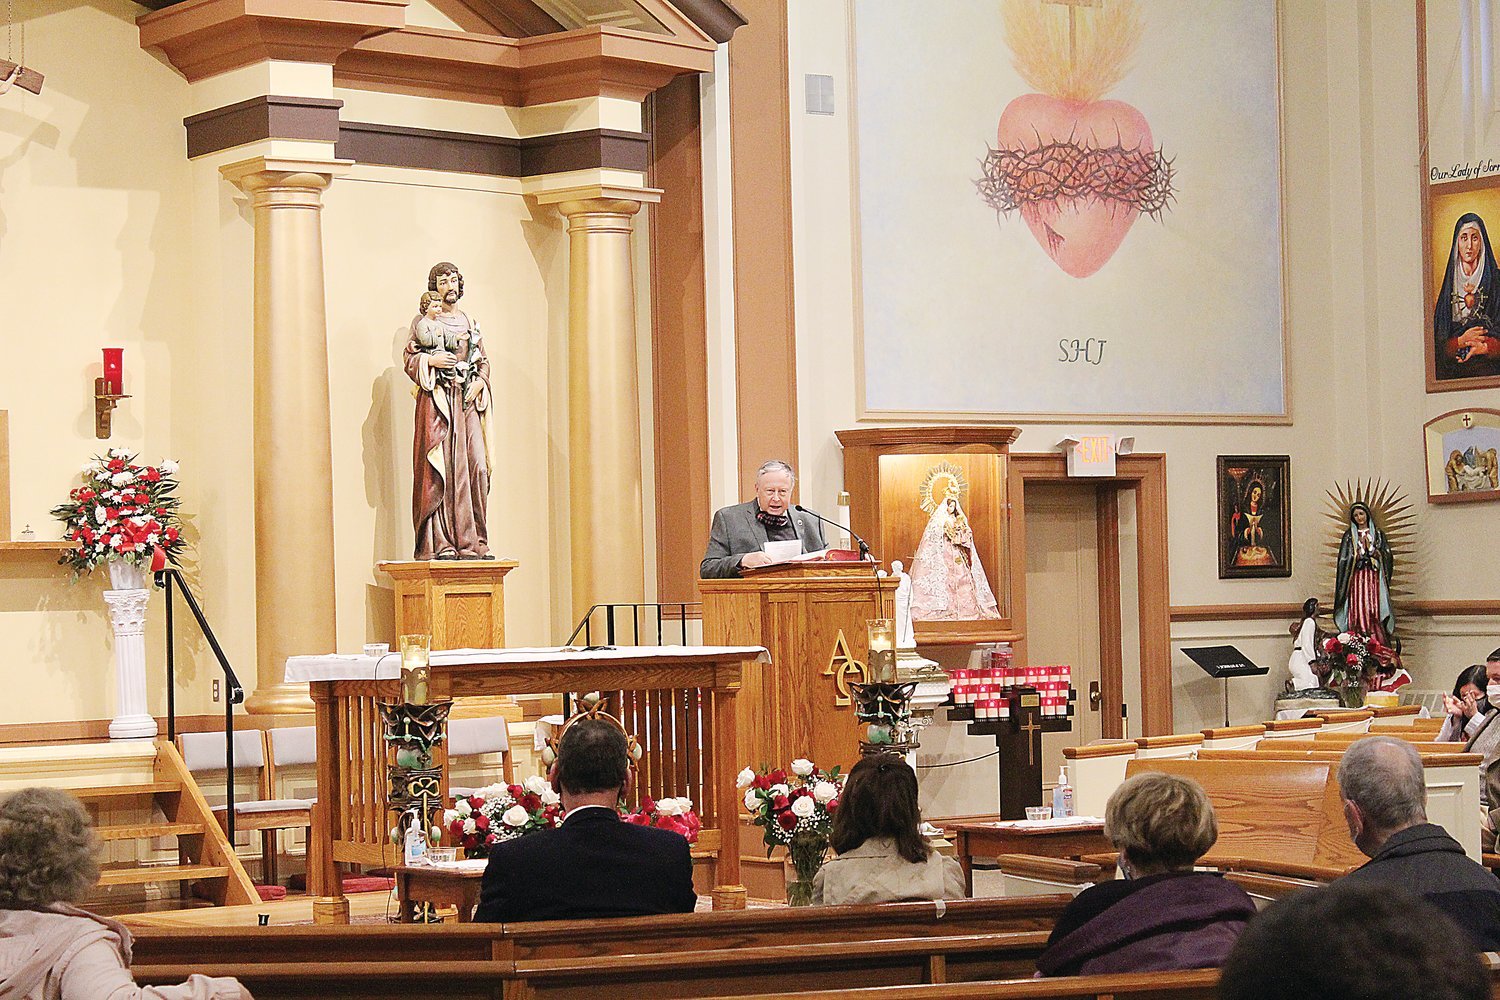 Dr. Daniel Harrop, president of the Rhode Island Catholic Medical Society, speaks during a Mass to honor the ministry of health care workers and to pray for those lost to COVID-19.